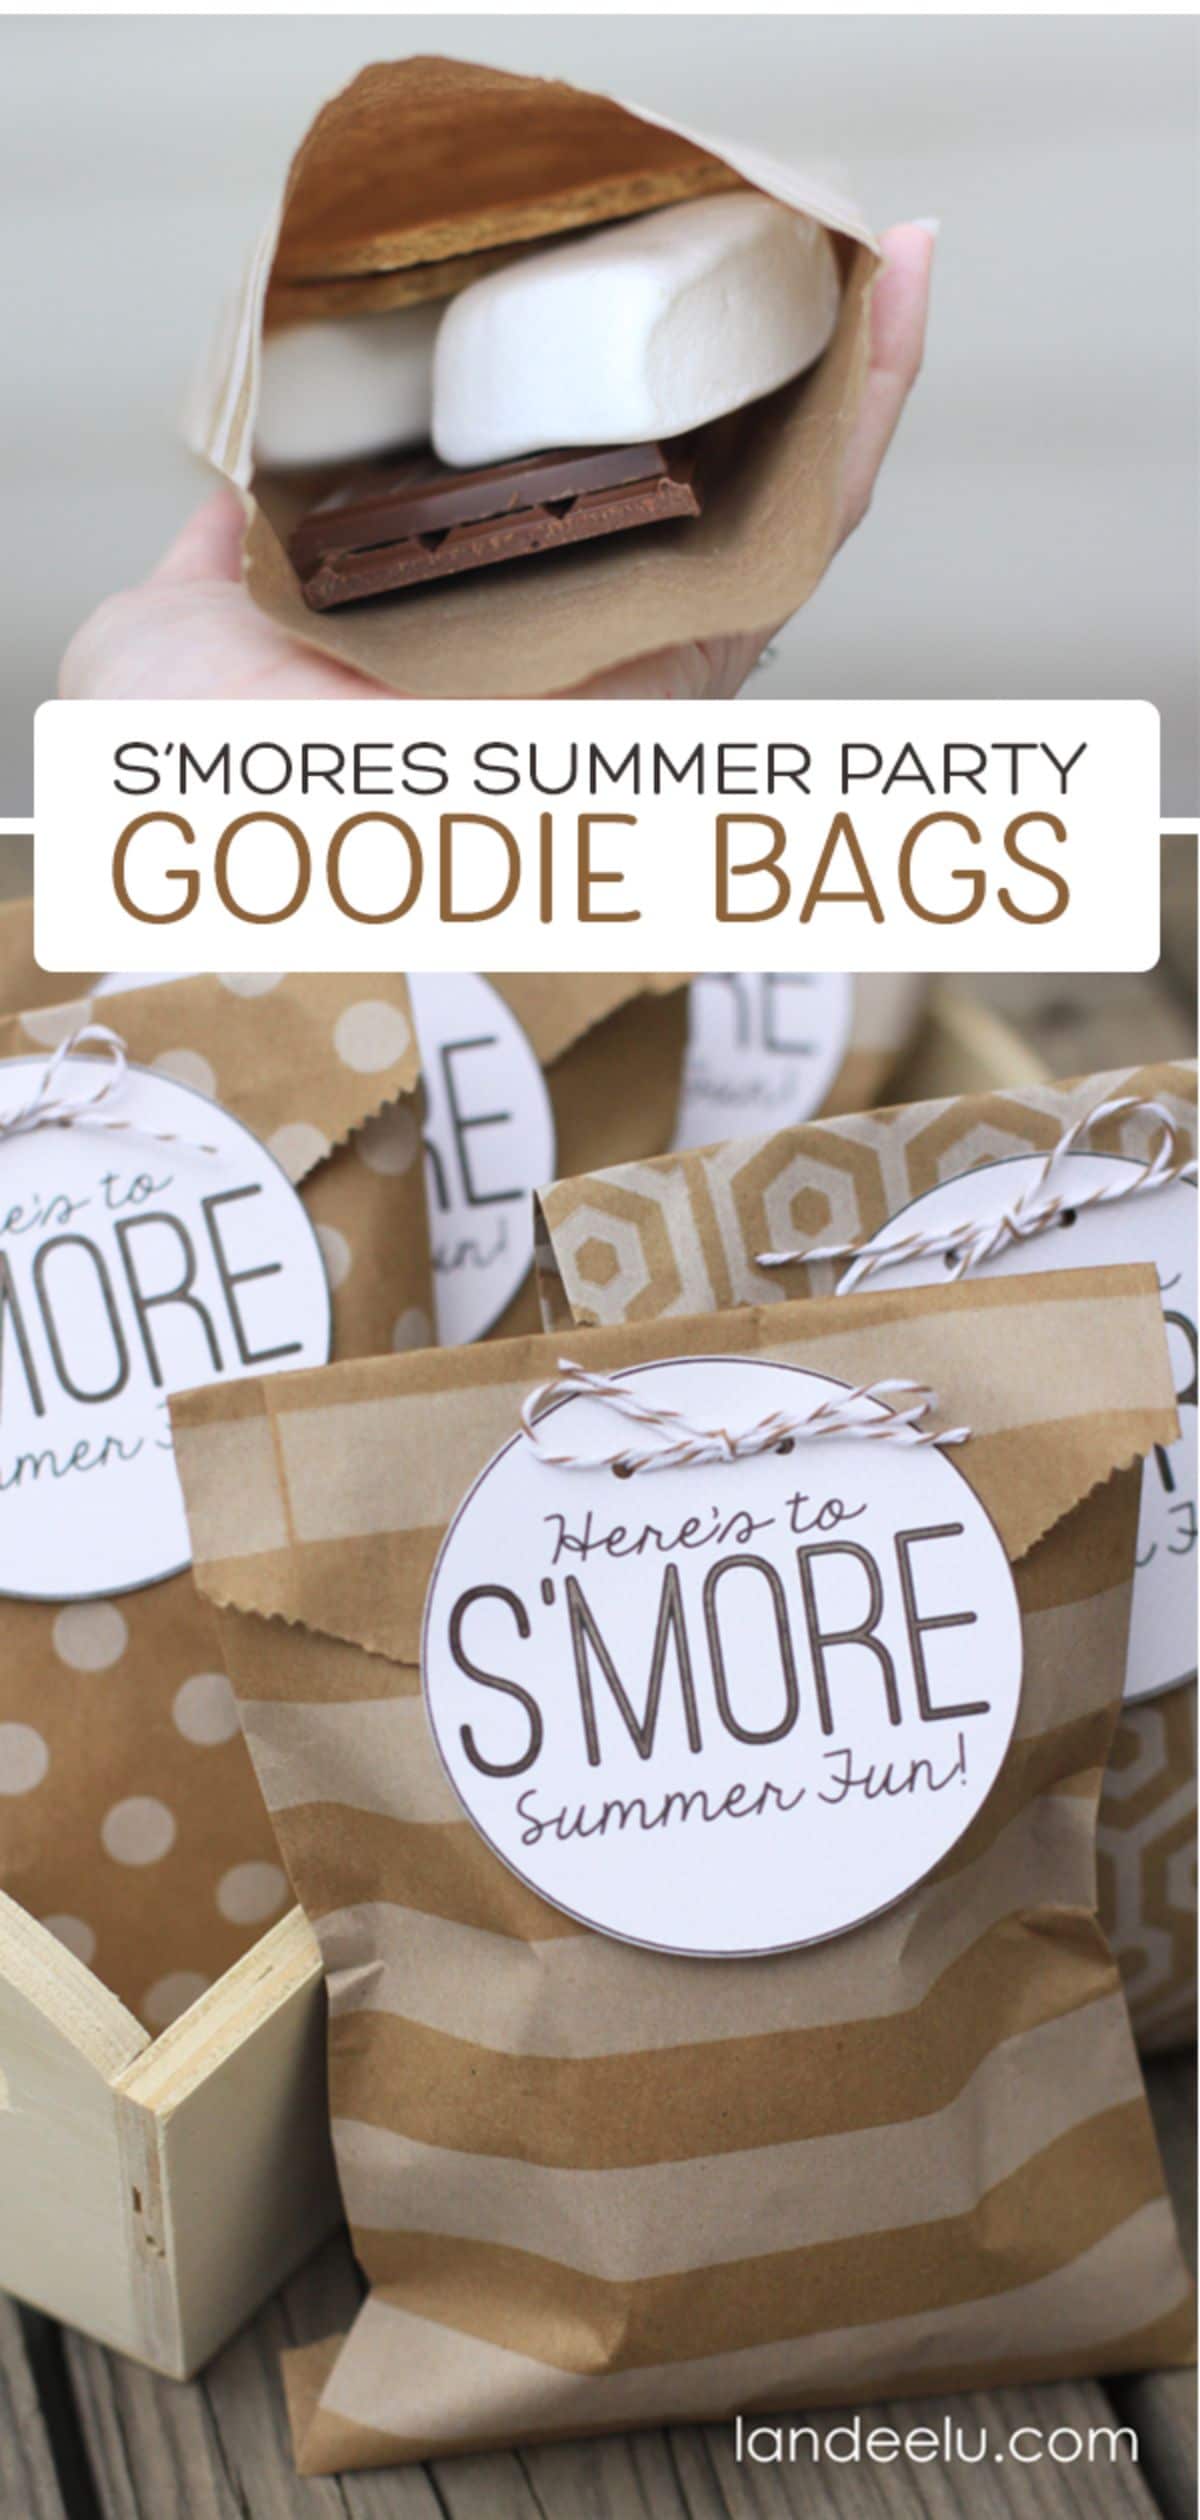 The text reads "S'mores summer party goodie bags" The image is of brown bags labelled with "Here's to s'more summer fun"